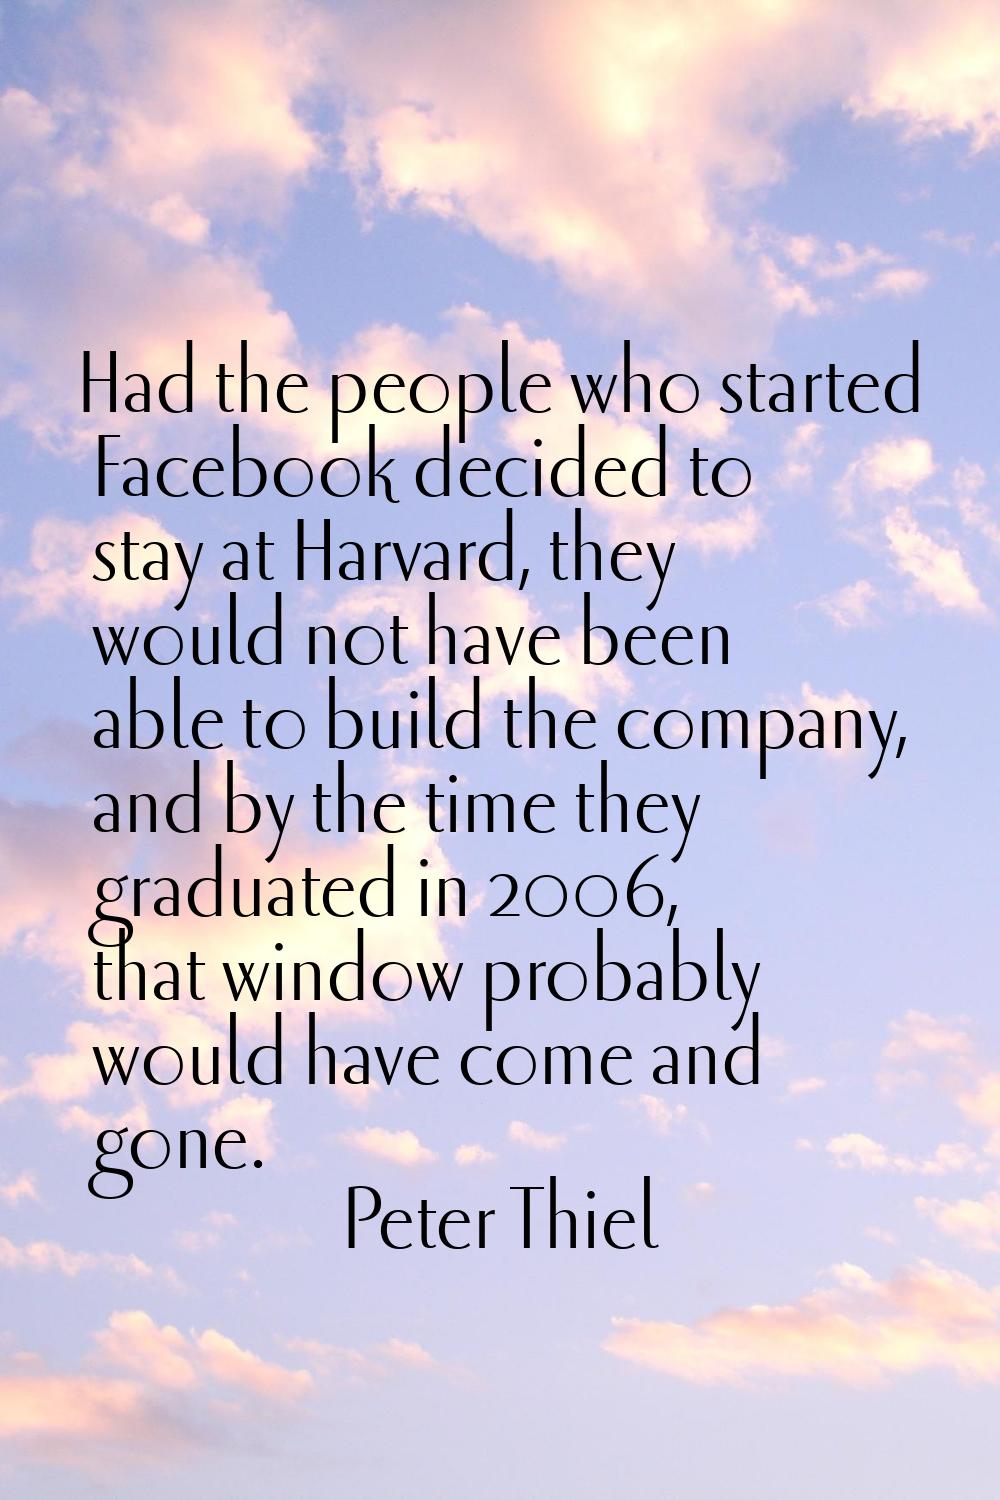 Had the people who started Facebook decided to stay at Harvard, they would not have been able to bu